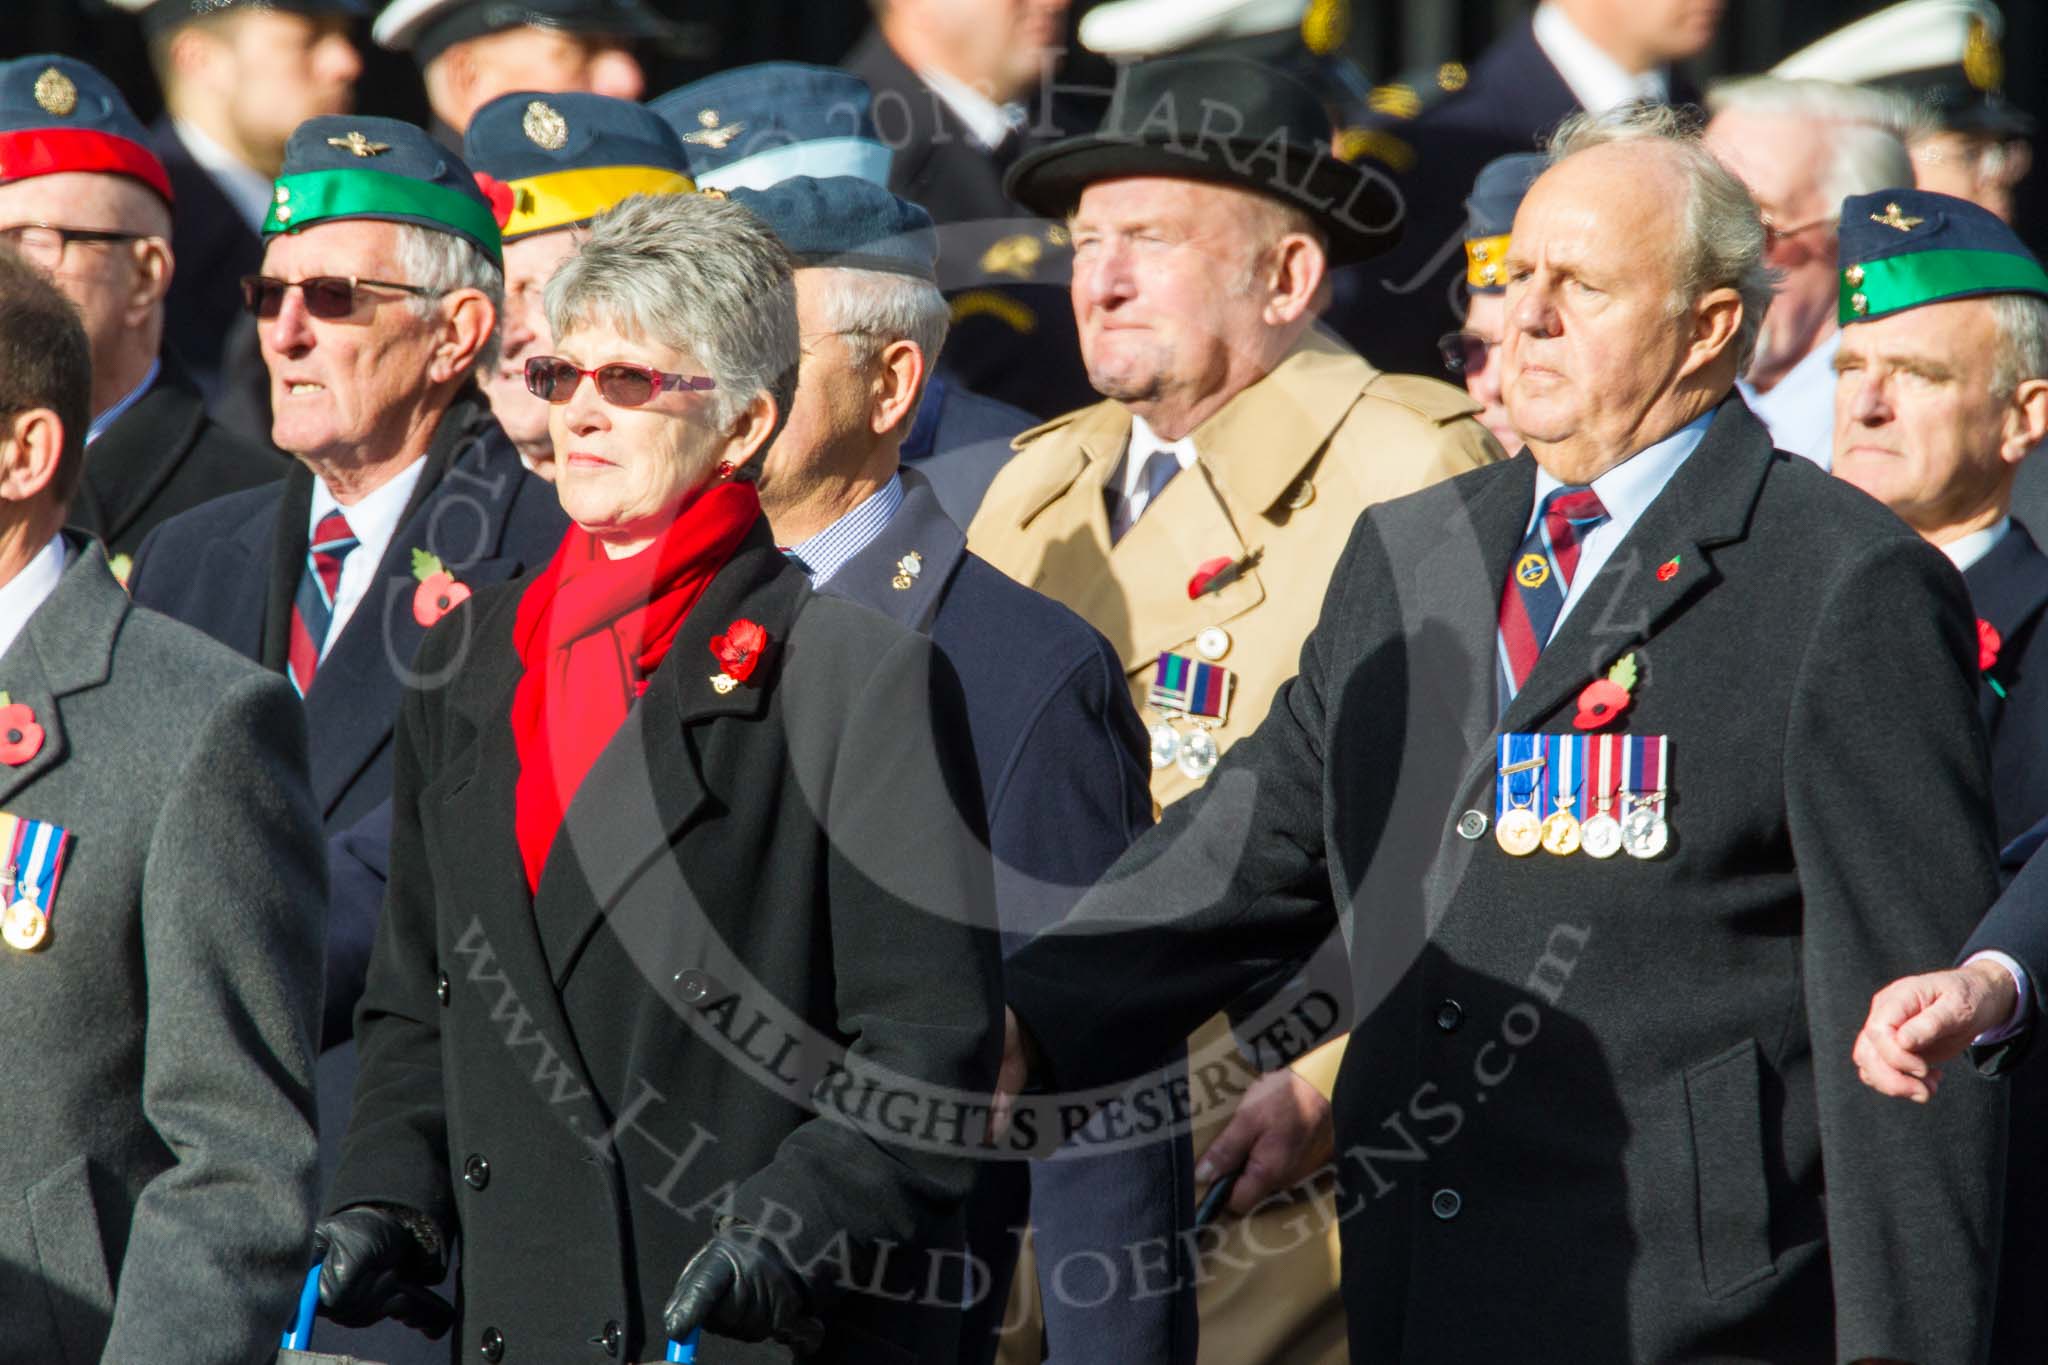 Remembrance Sunday at the Cenotaph in London 2014: Group C19 - Royal Air Forces Ex-Prisoner's of War Association.
Press stand opposite the Foreign Office building, Whitehall, London SW1,
London,
Greater London,
United Kingdom,
on 09 November 2014 at 11:40, image #166